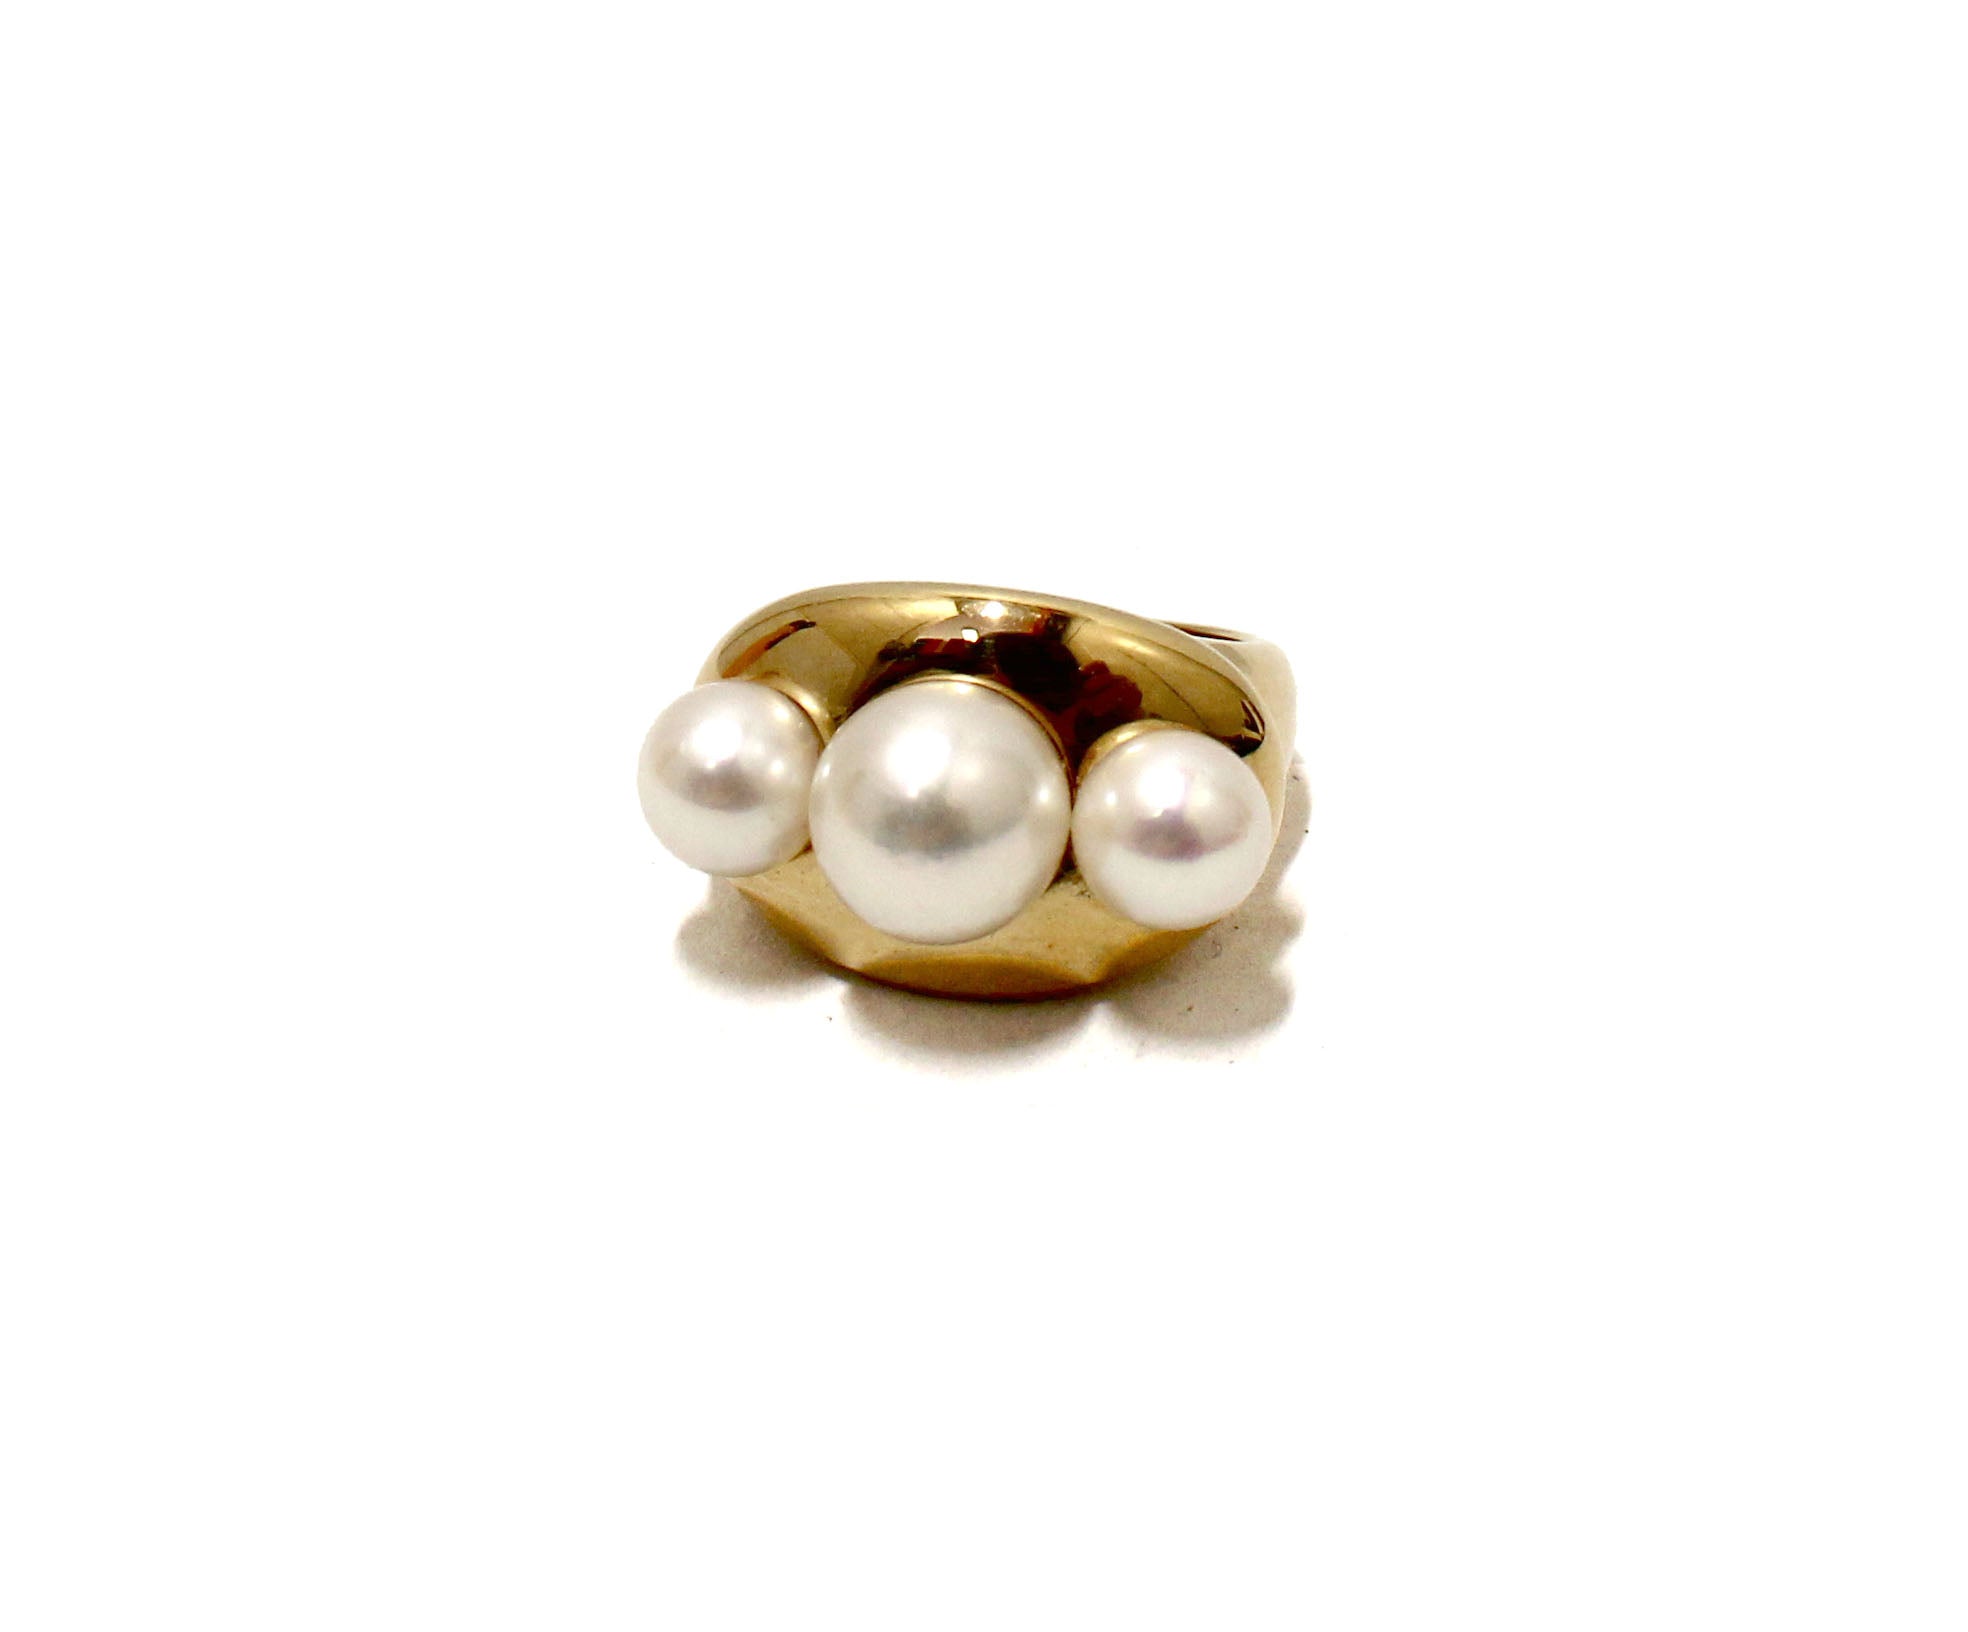 Authentic Chanel 18K Yellow Gold Pearl Ring Size 6